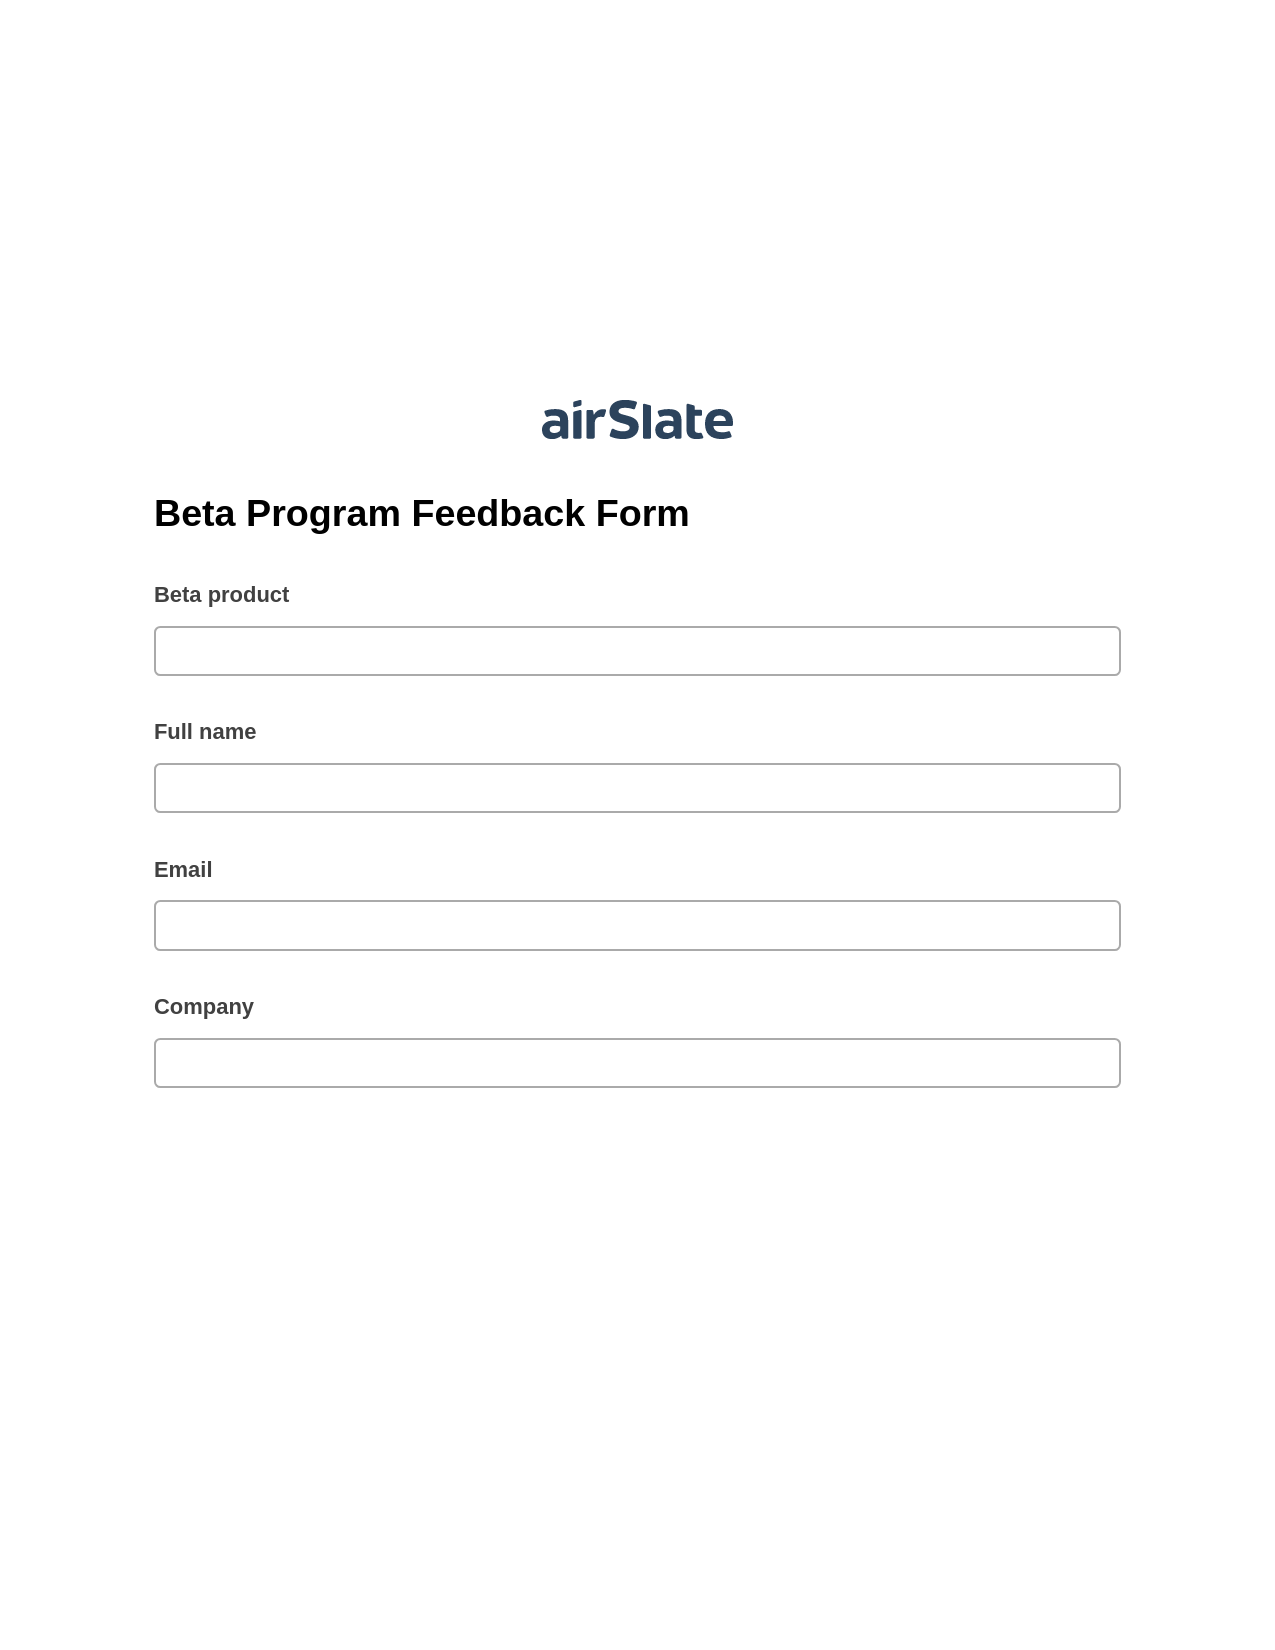 Beta Program Feedback Form Pre-fill from Google Sheets Bot, Revoke Access Bot, Export to NetSuite Record Bot